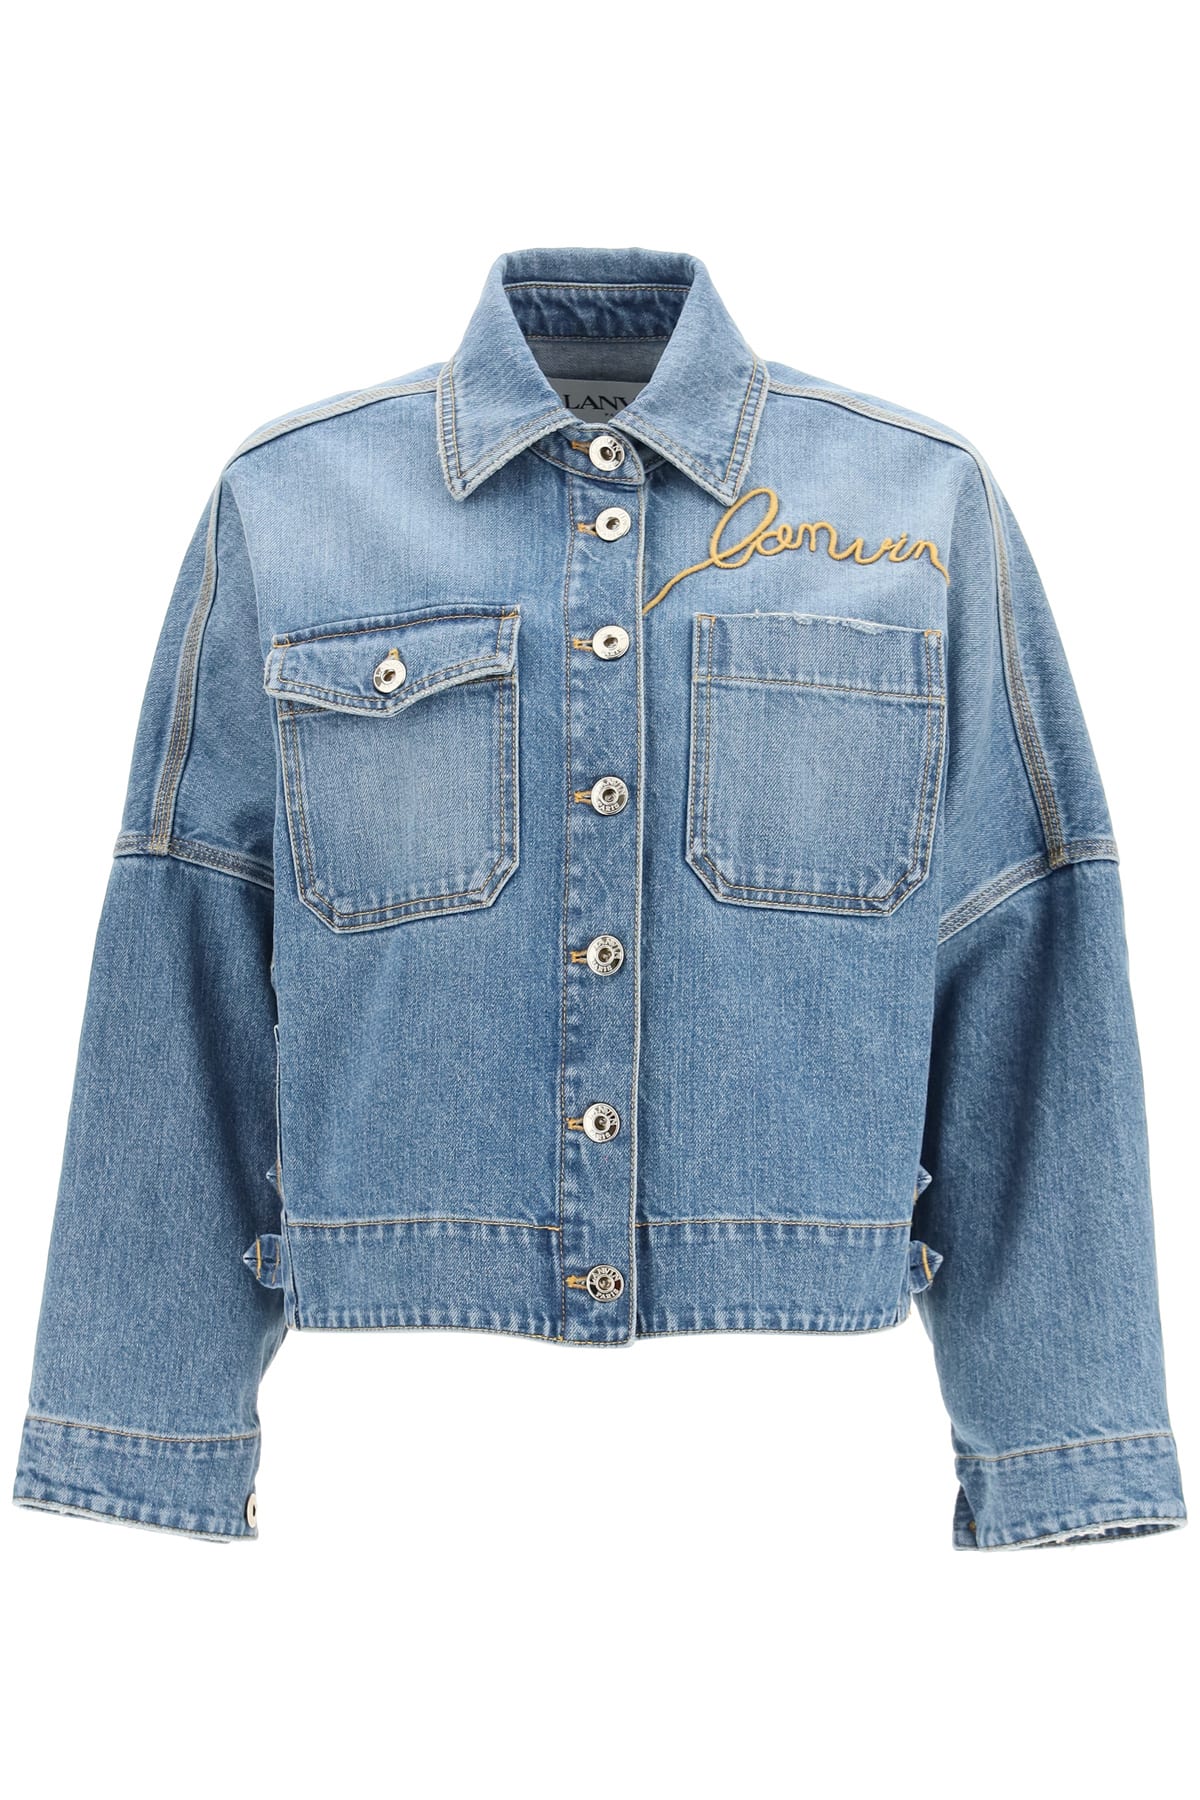 Lanvin Denim Jacket With Logo Embroidery